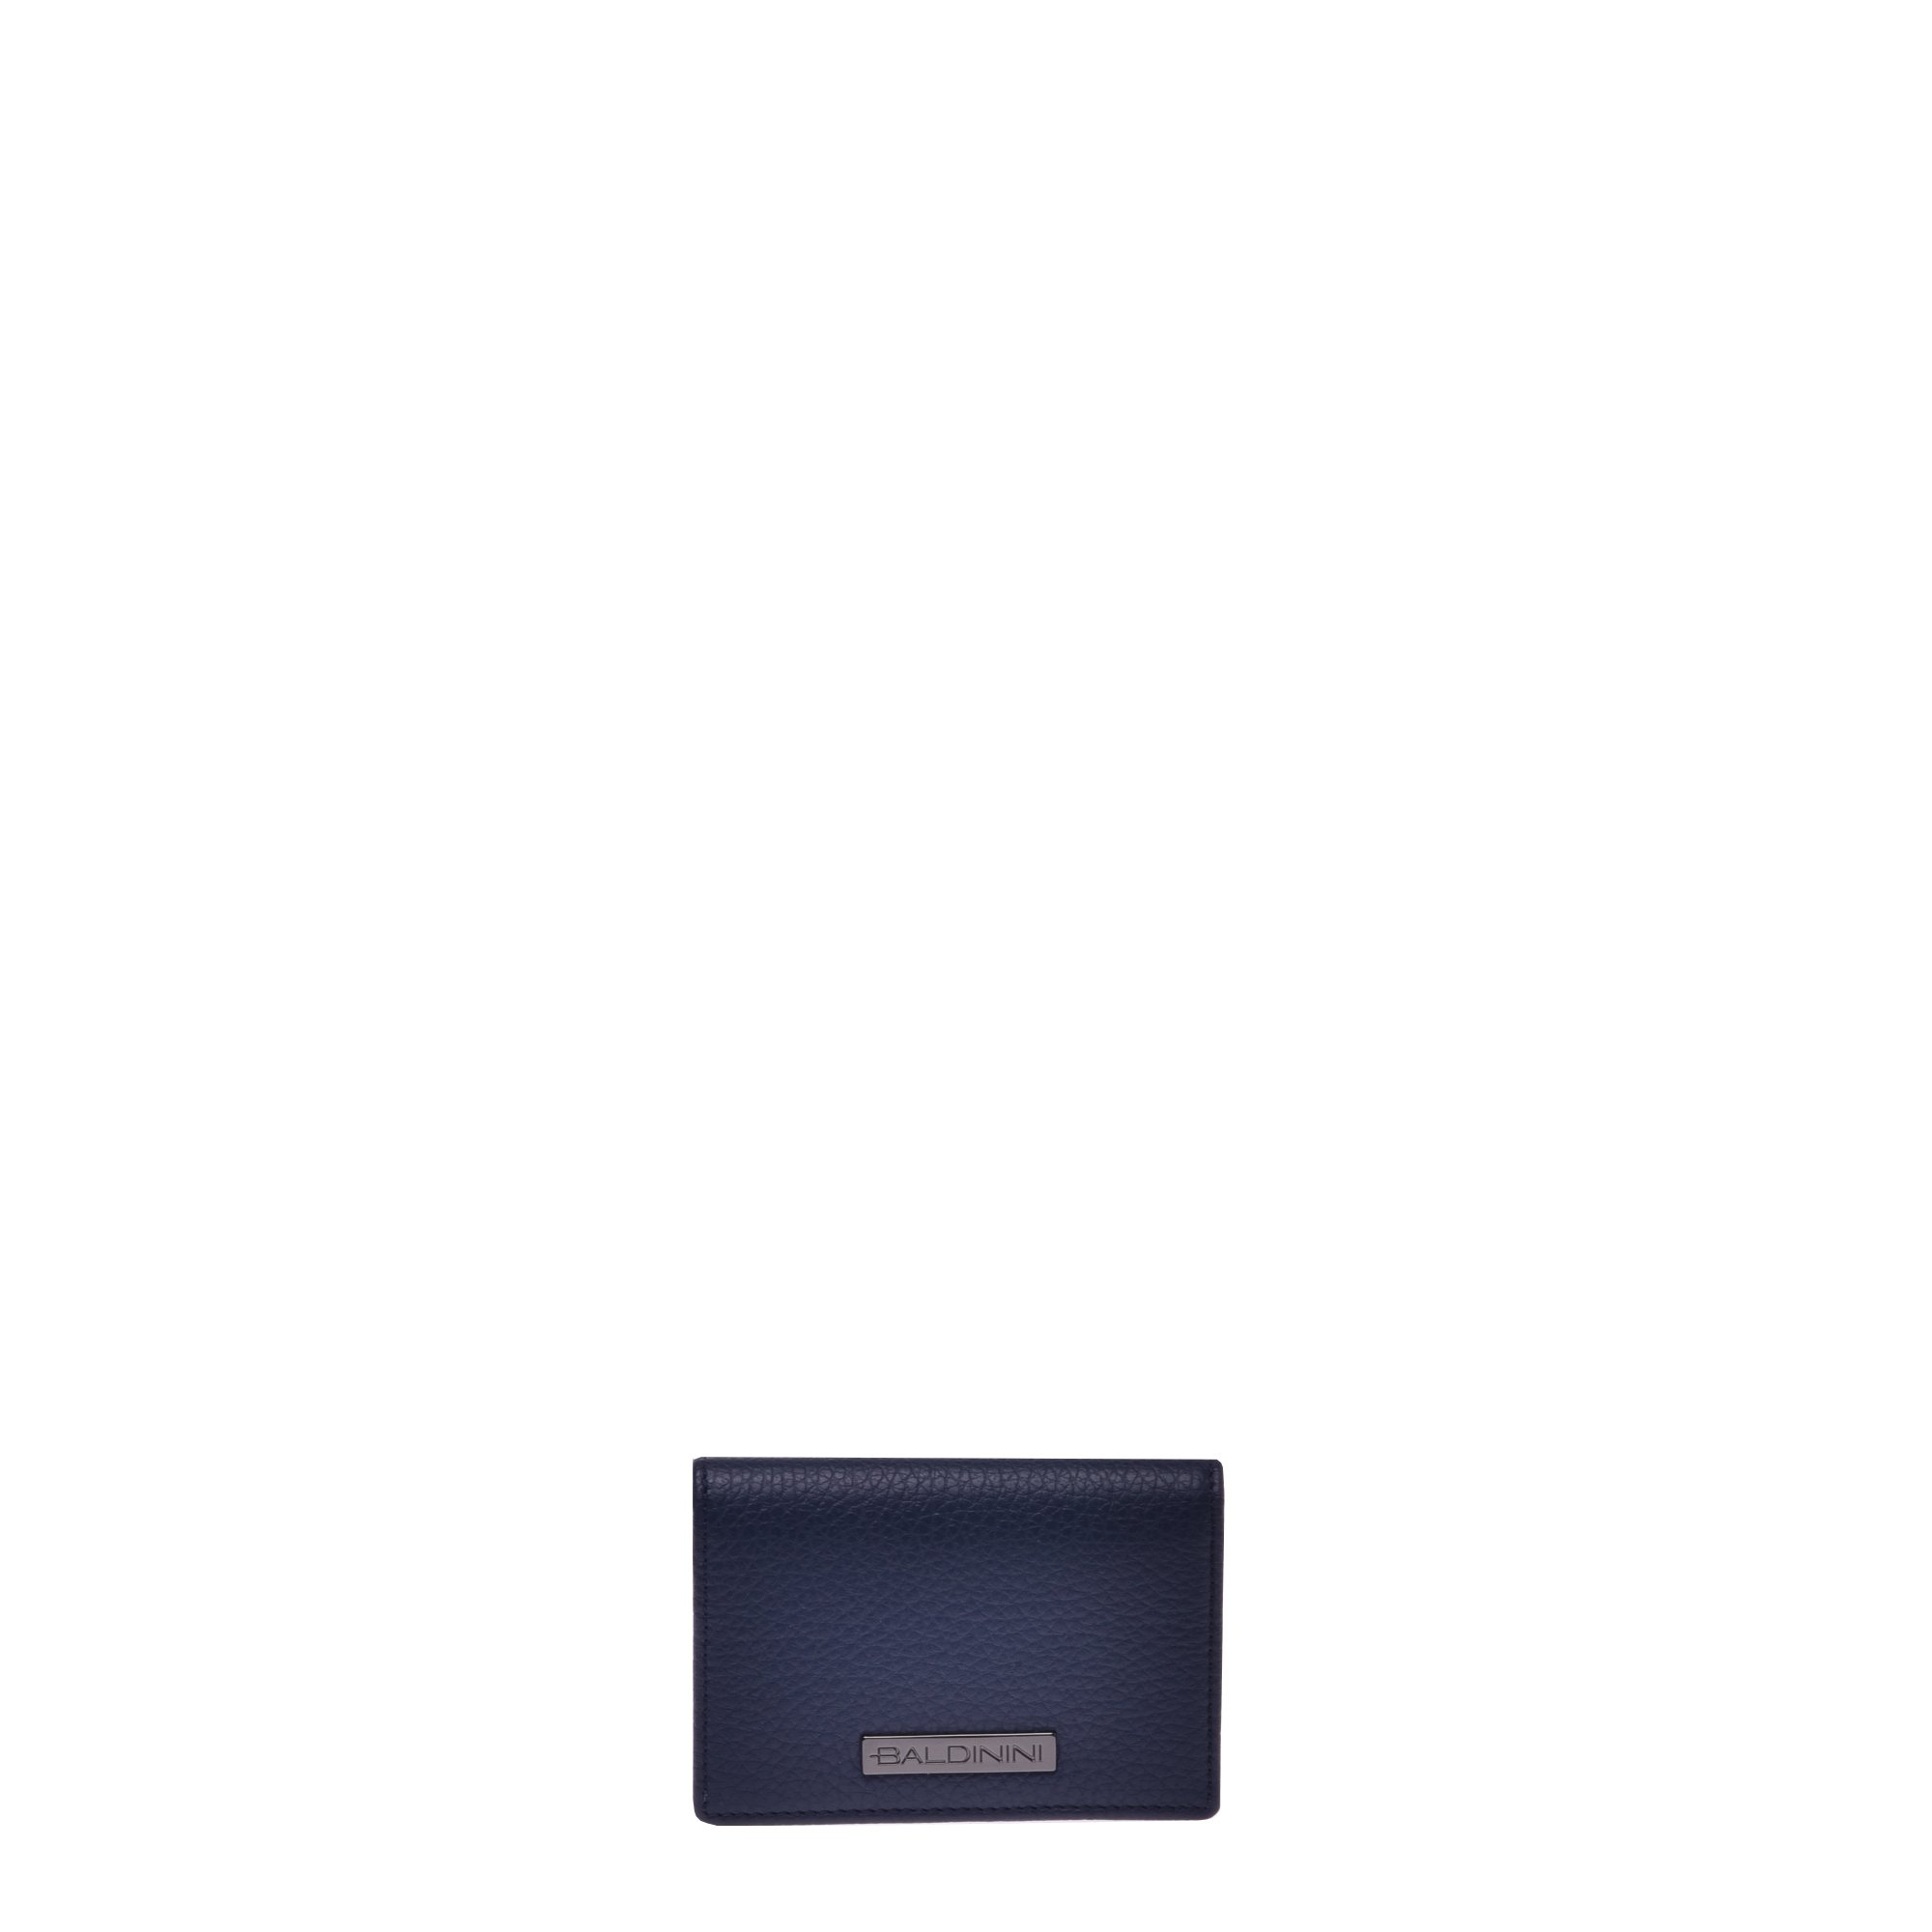 Dark blue woven leather wallet image